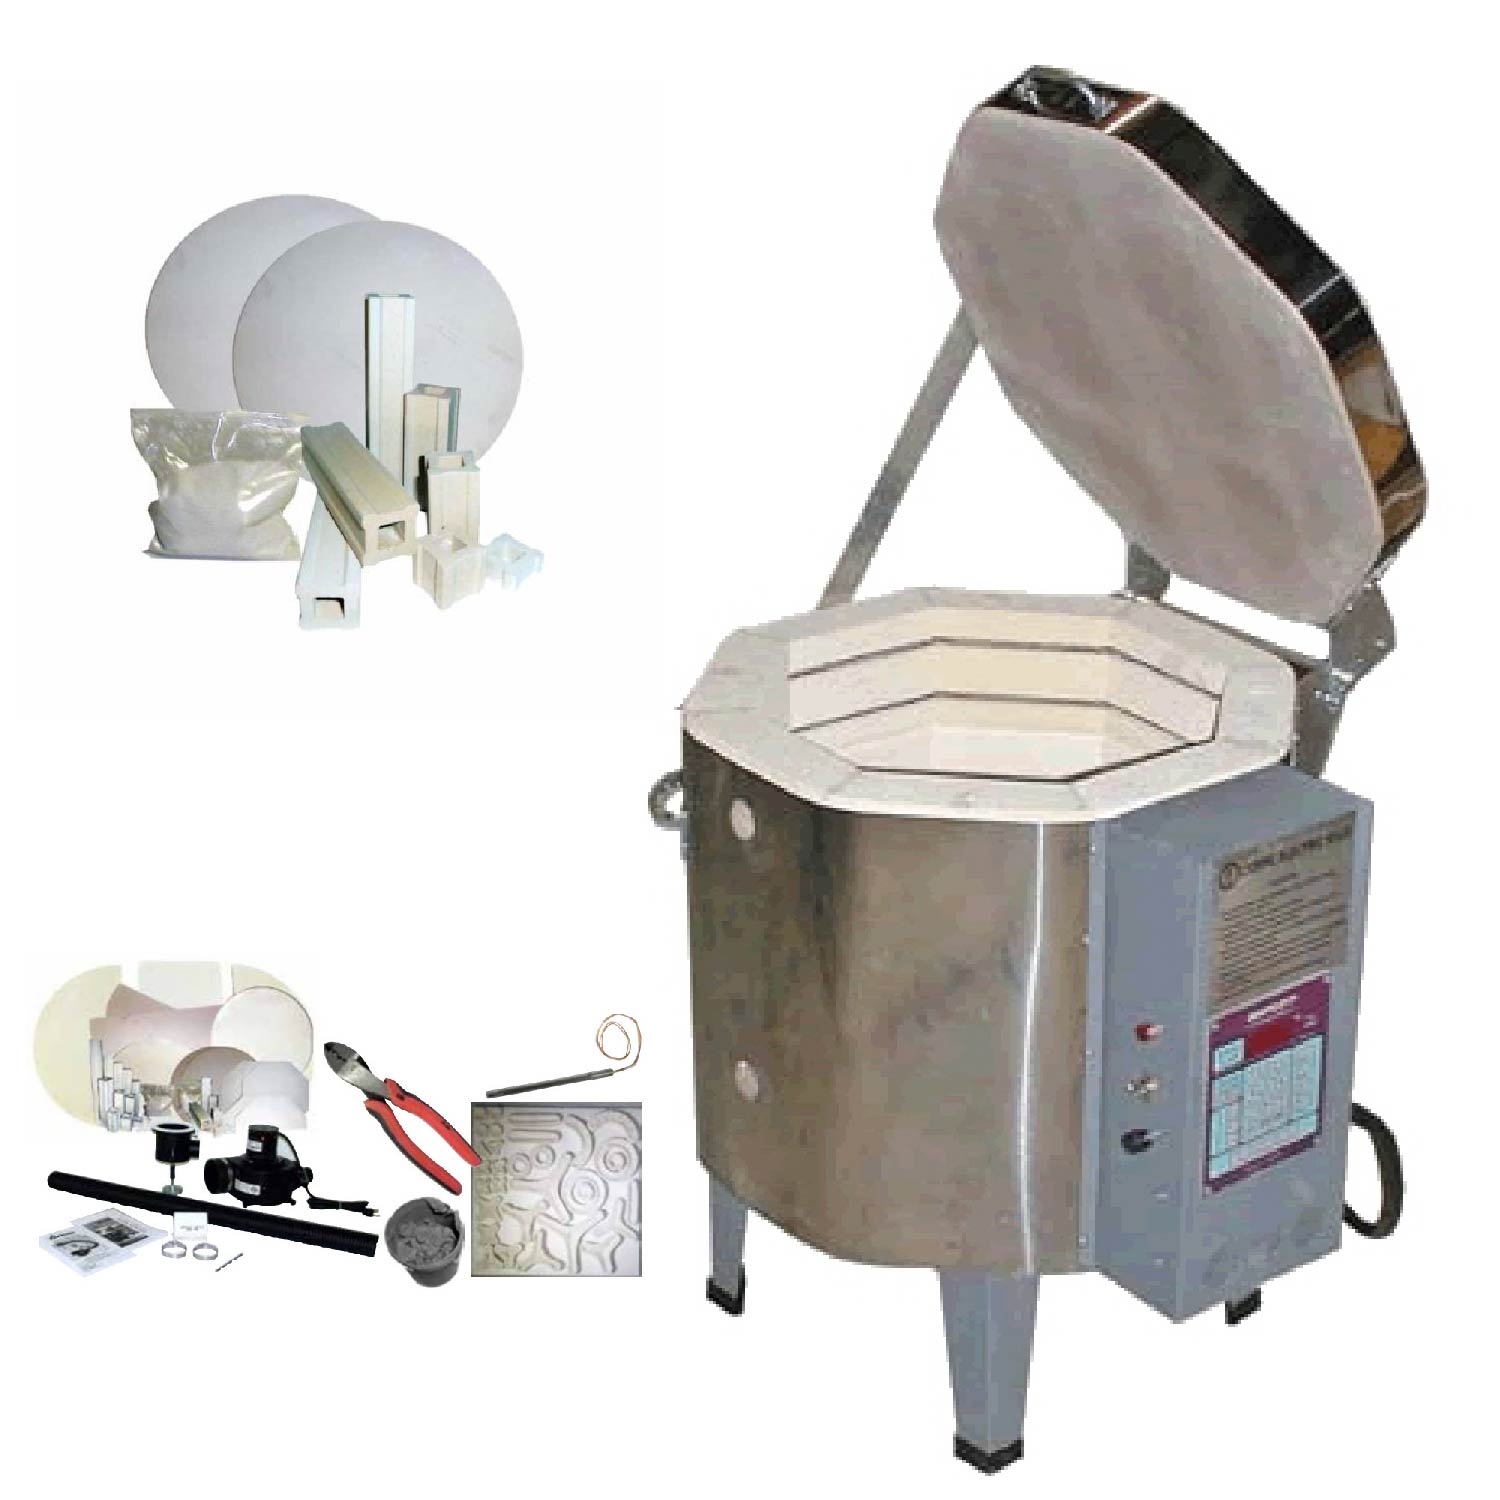 Olympic FREEDOM 1414HE KILN PACKAGE: Cone 10, Electronic Control with Vent, Furniture Kit and More!